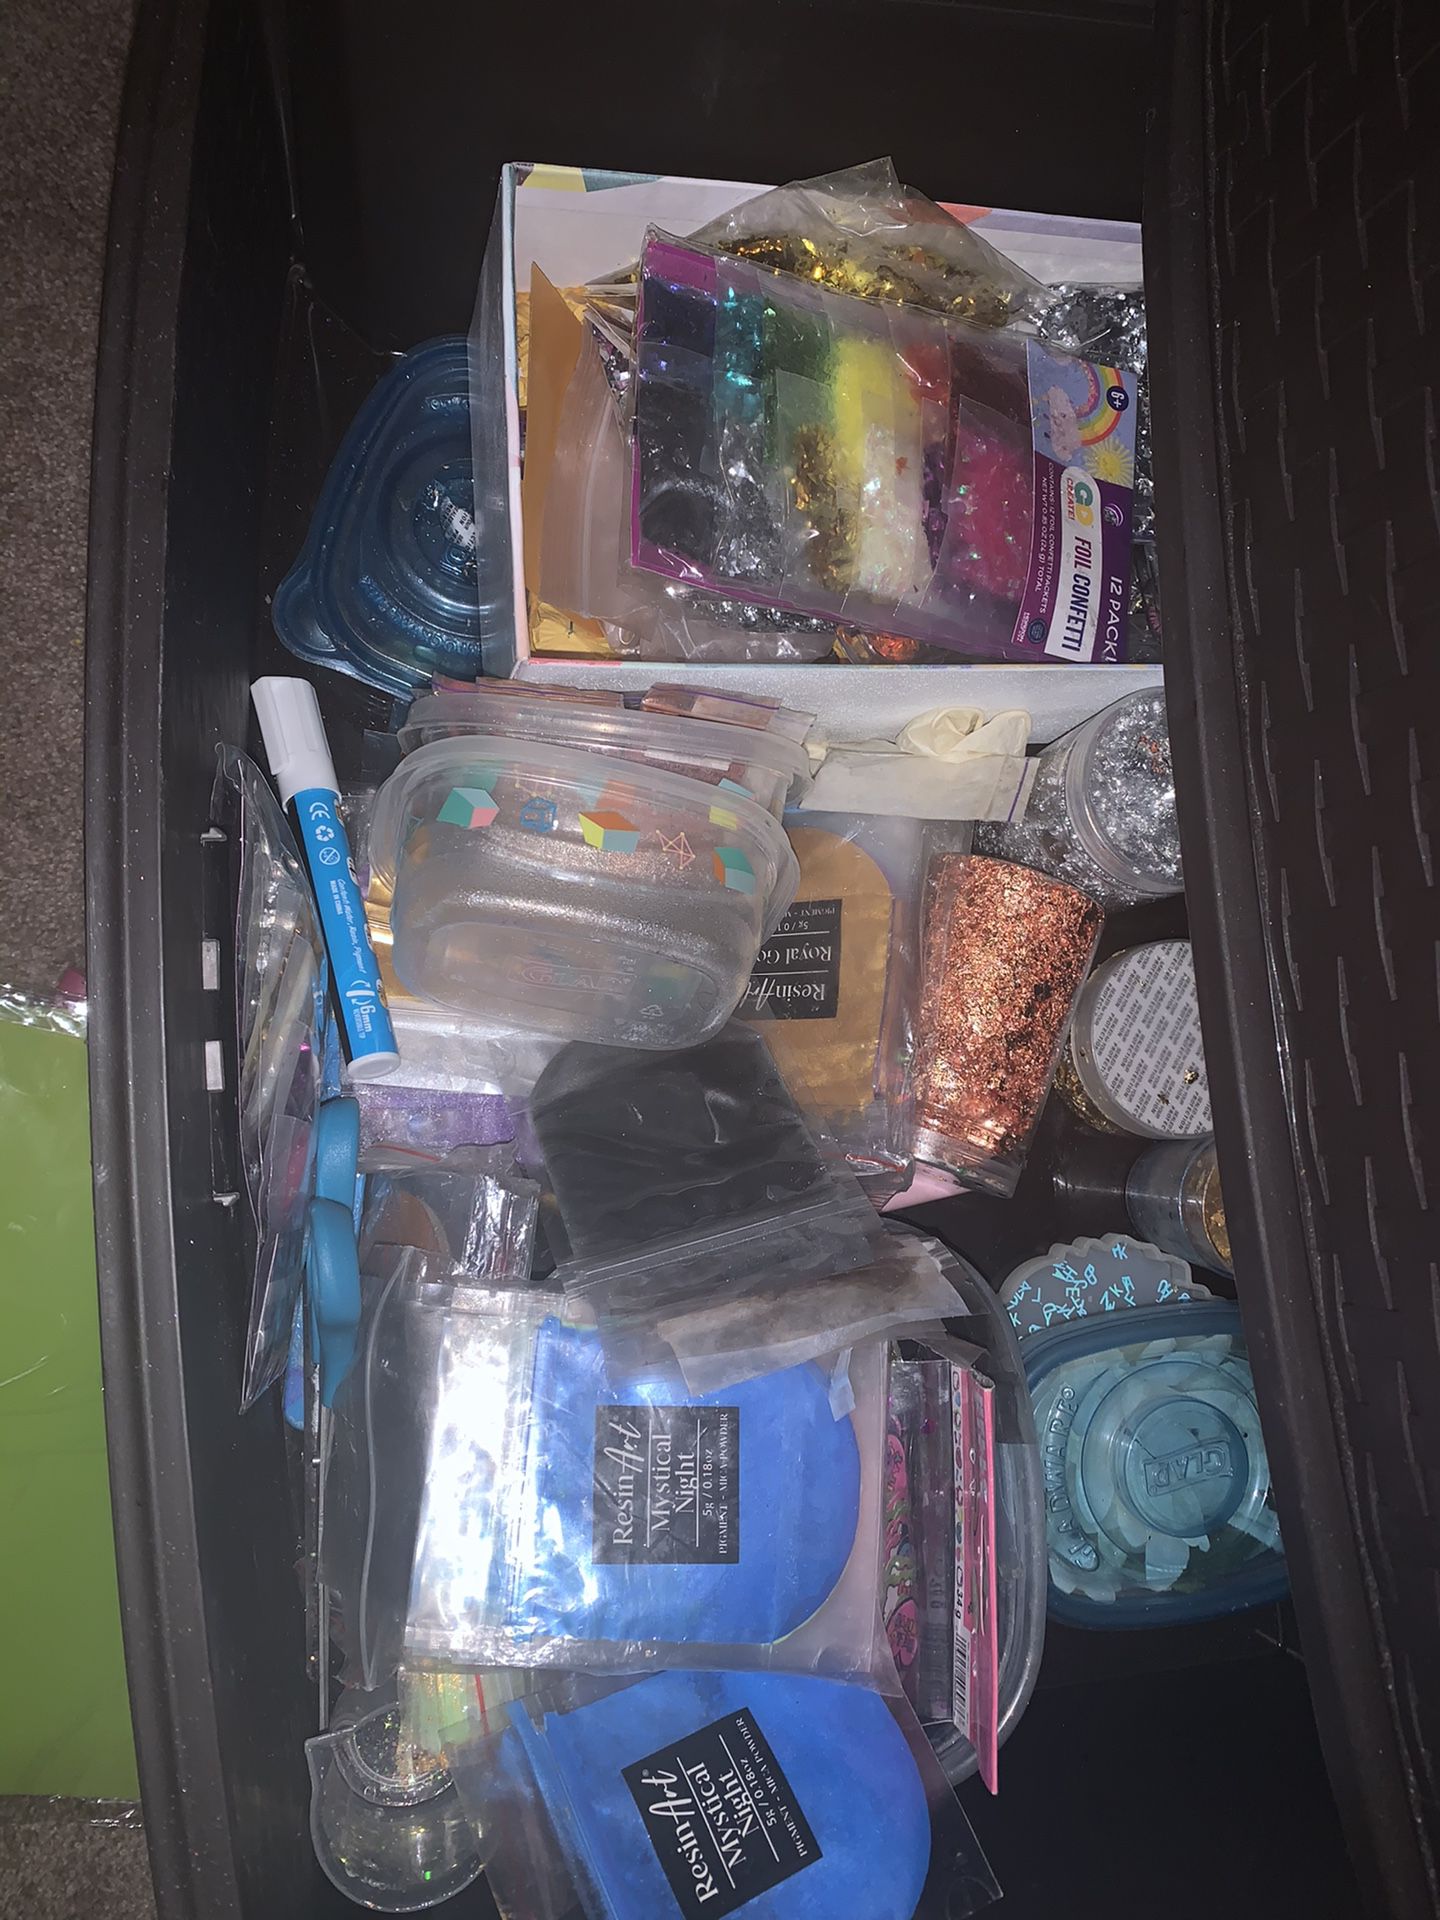 ART BIN FILLED WITH RESIN CREATION MATERIALS